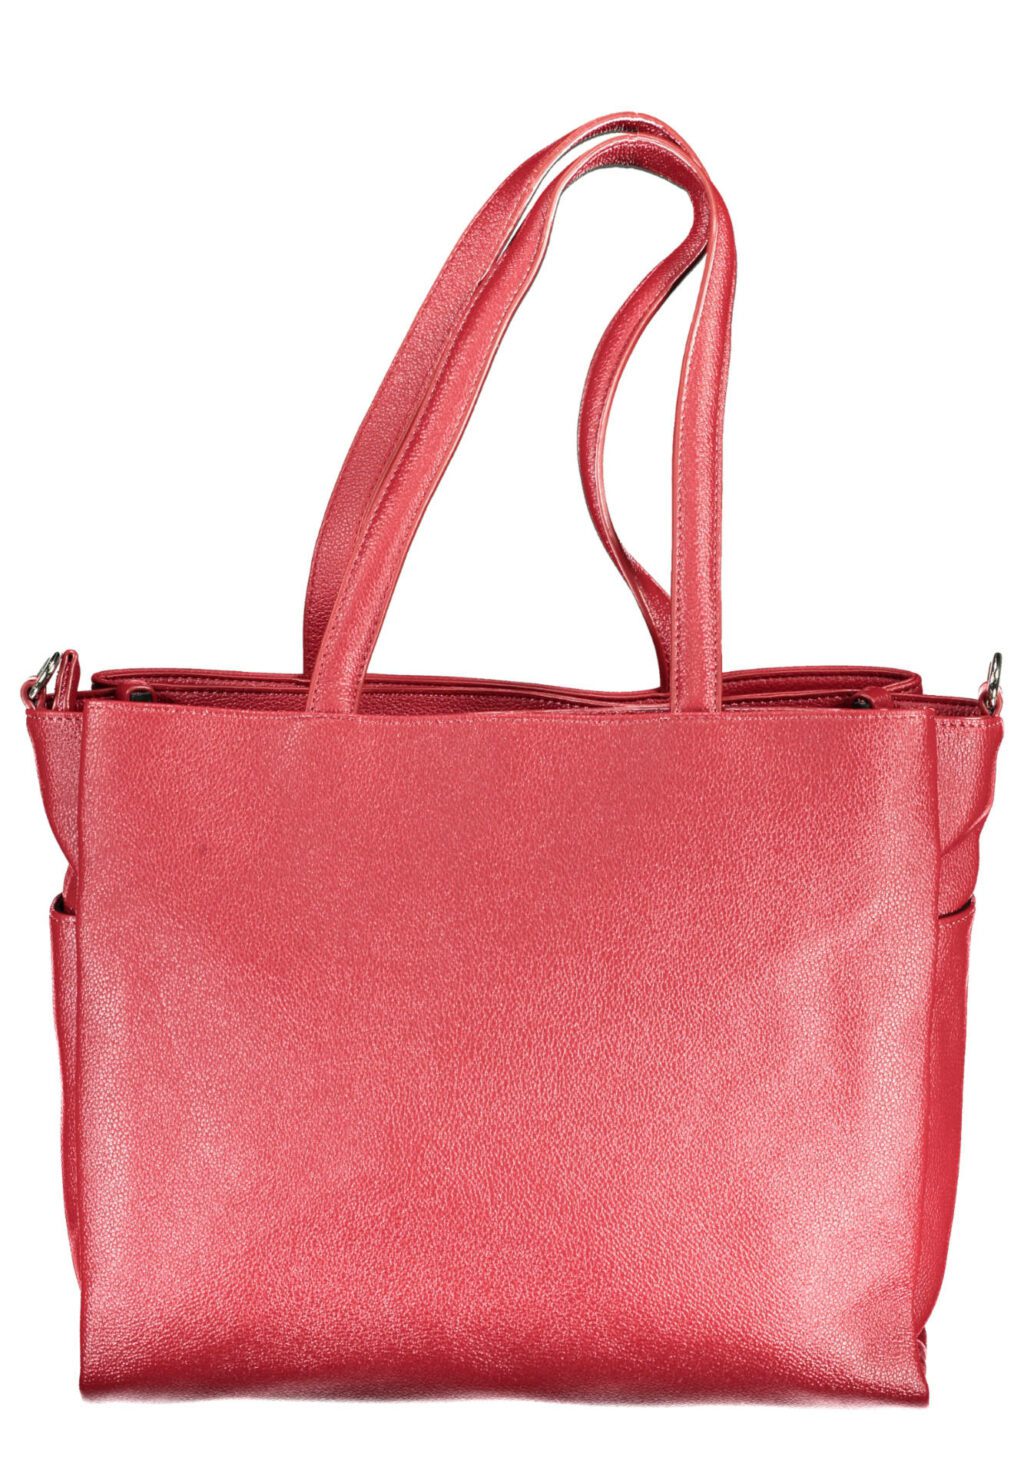 BYBLOS RED WOMEN'S BAG 20100085_ROSSO_333-RED